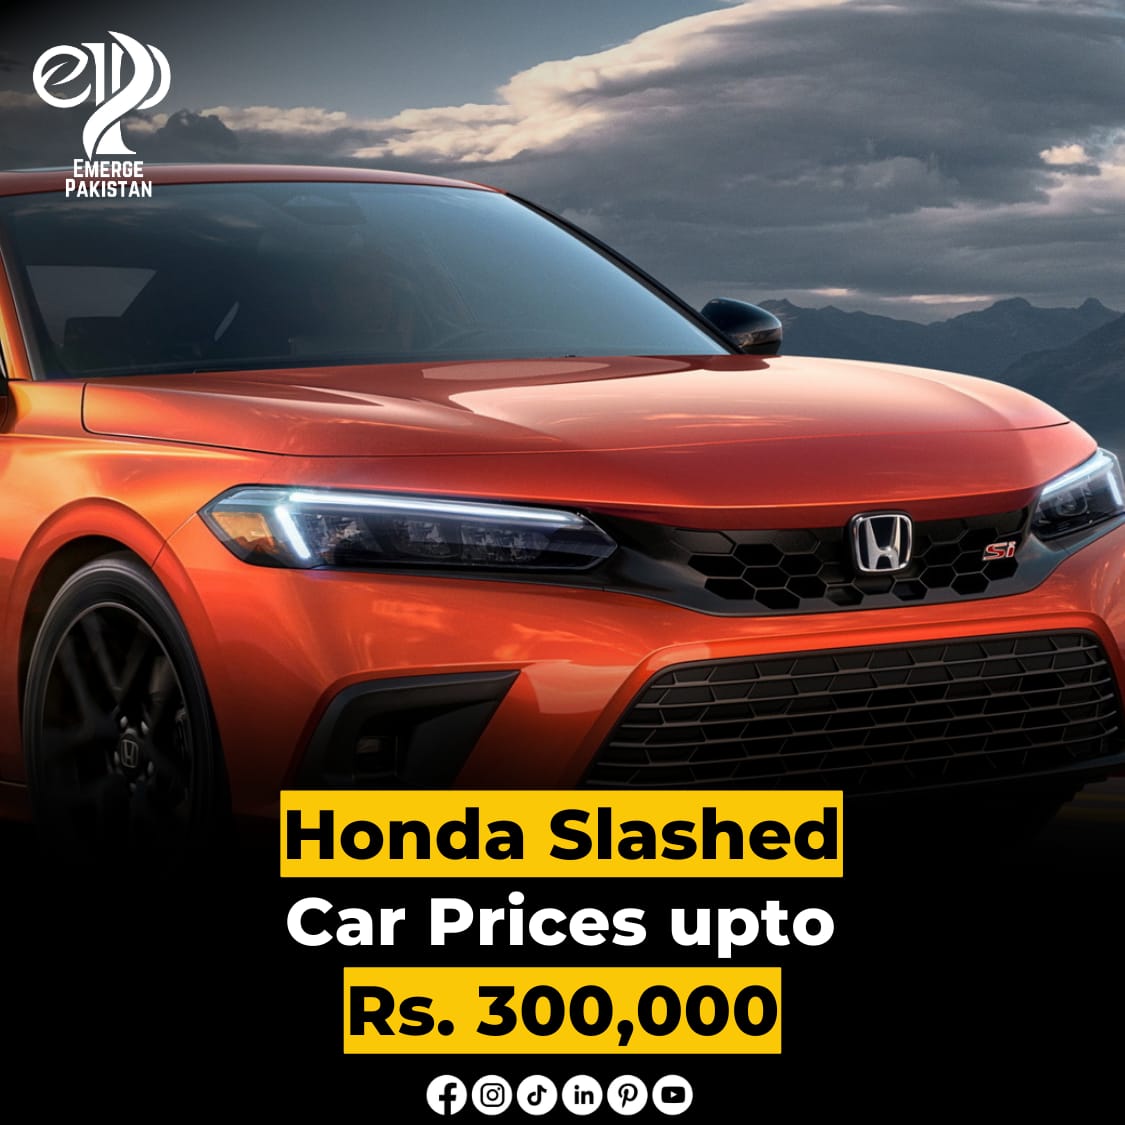 Rev up your excitement!  Honda is making dreams come true with car prices slashed up to Rs. 300,000. Your journey to affordable luxury starts here! 
#HondaDeals #AffordableRides